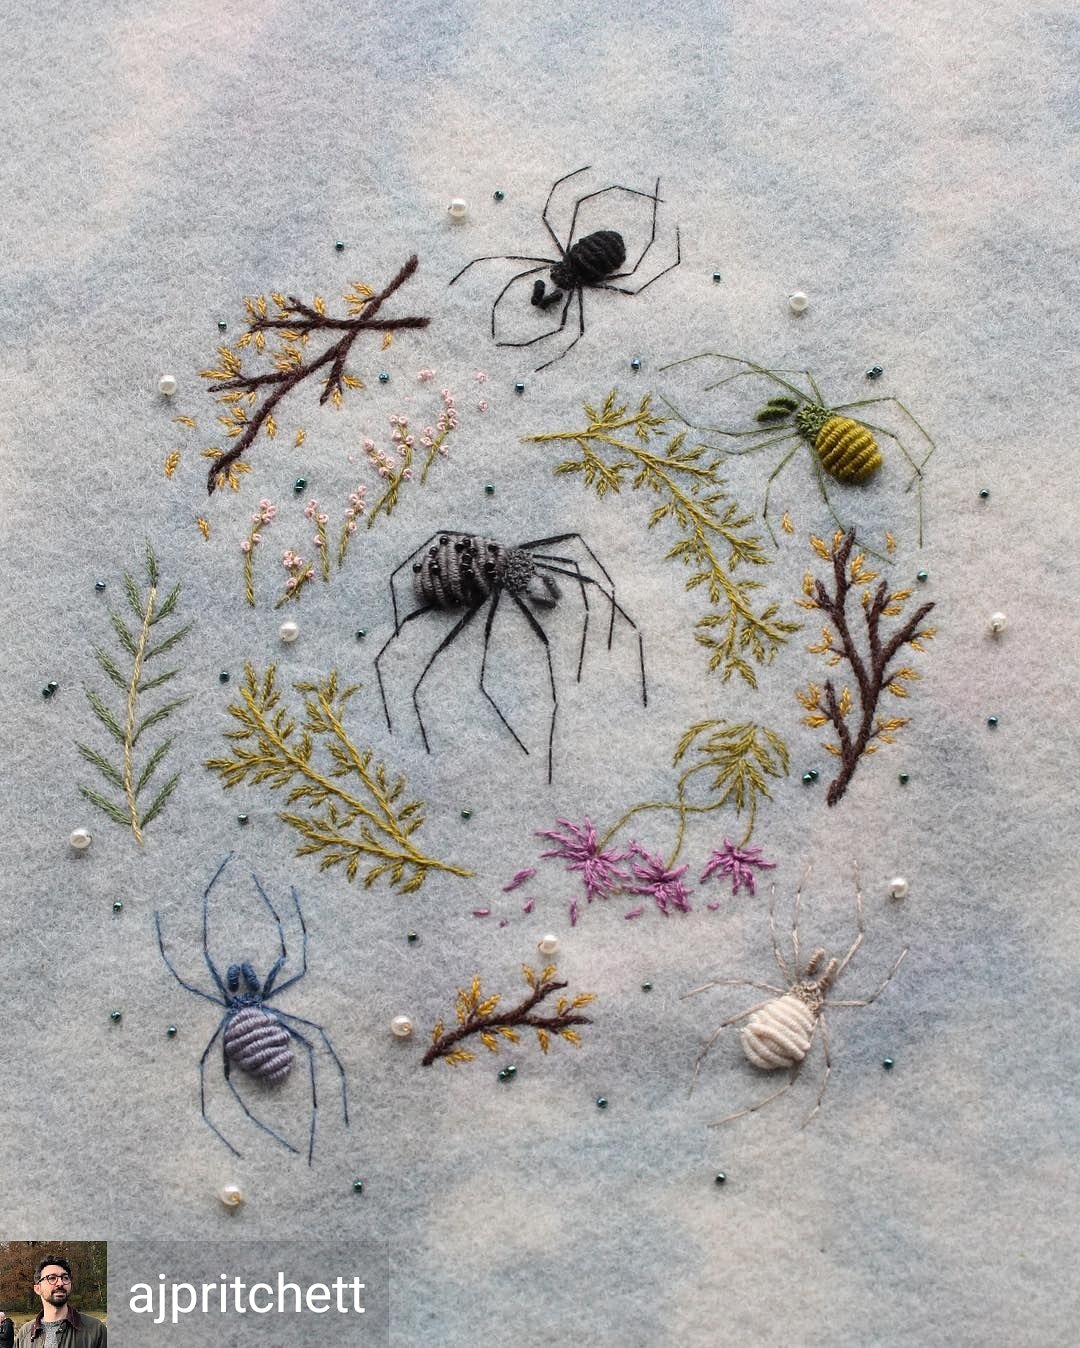 Embroidery of various spiders surrounded by plants